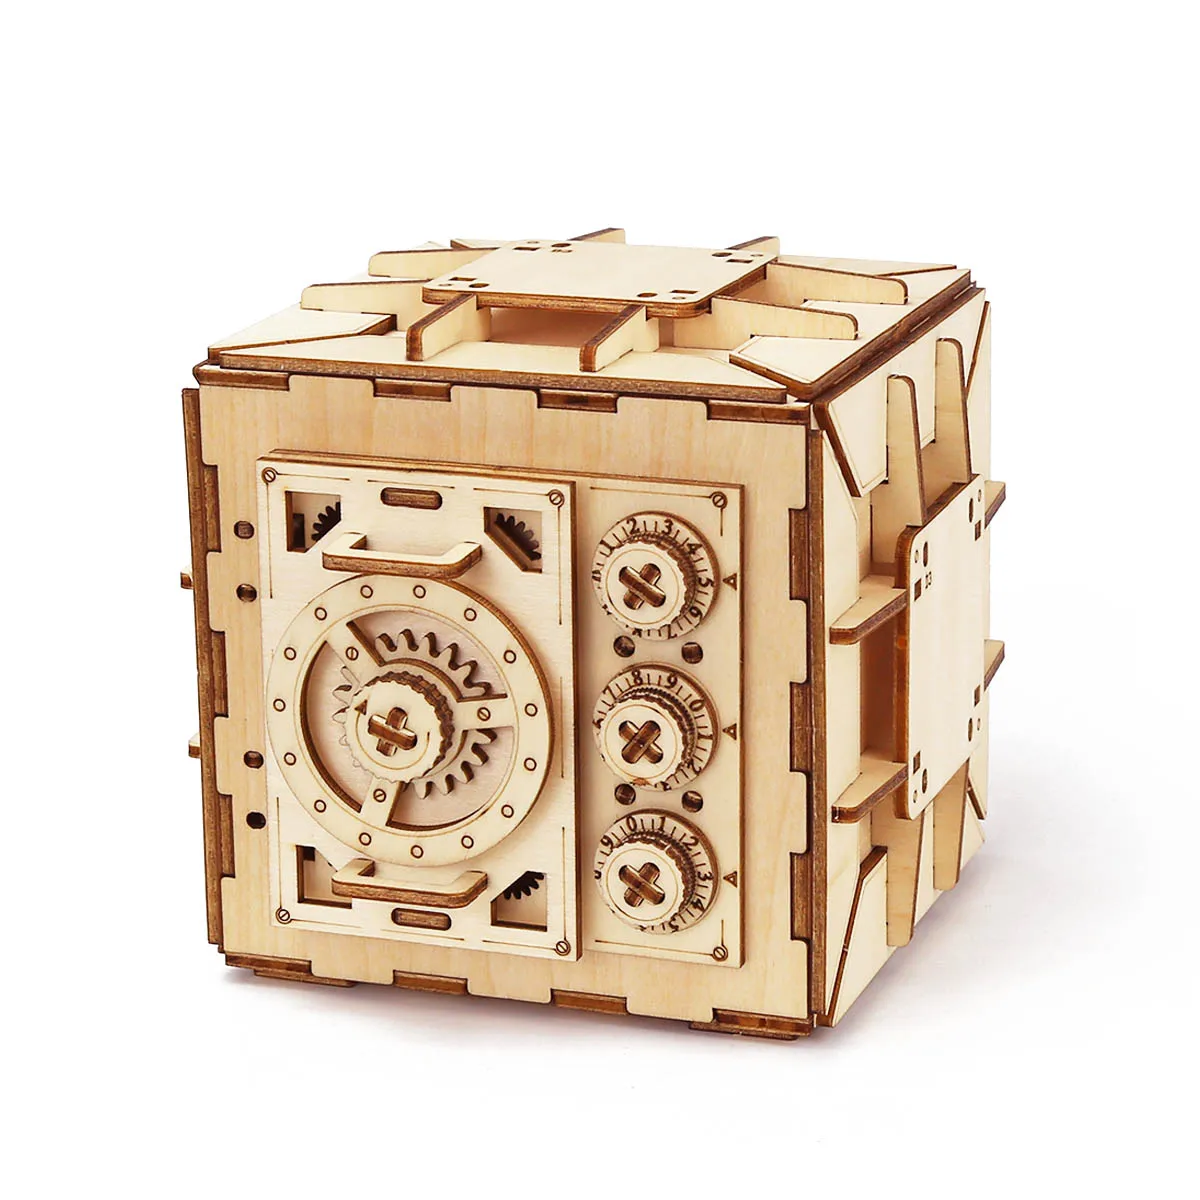 Safe Box Treasure 3D Wooden Model Locker Kit DIY Coin Bank Mechanical Puzzle Brain Teaser Projects For Adults and Teens